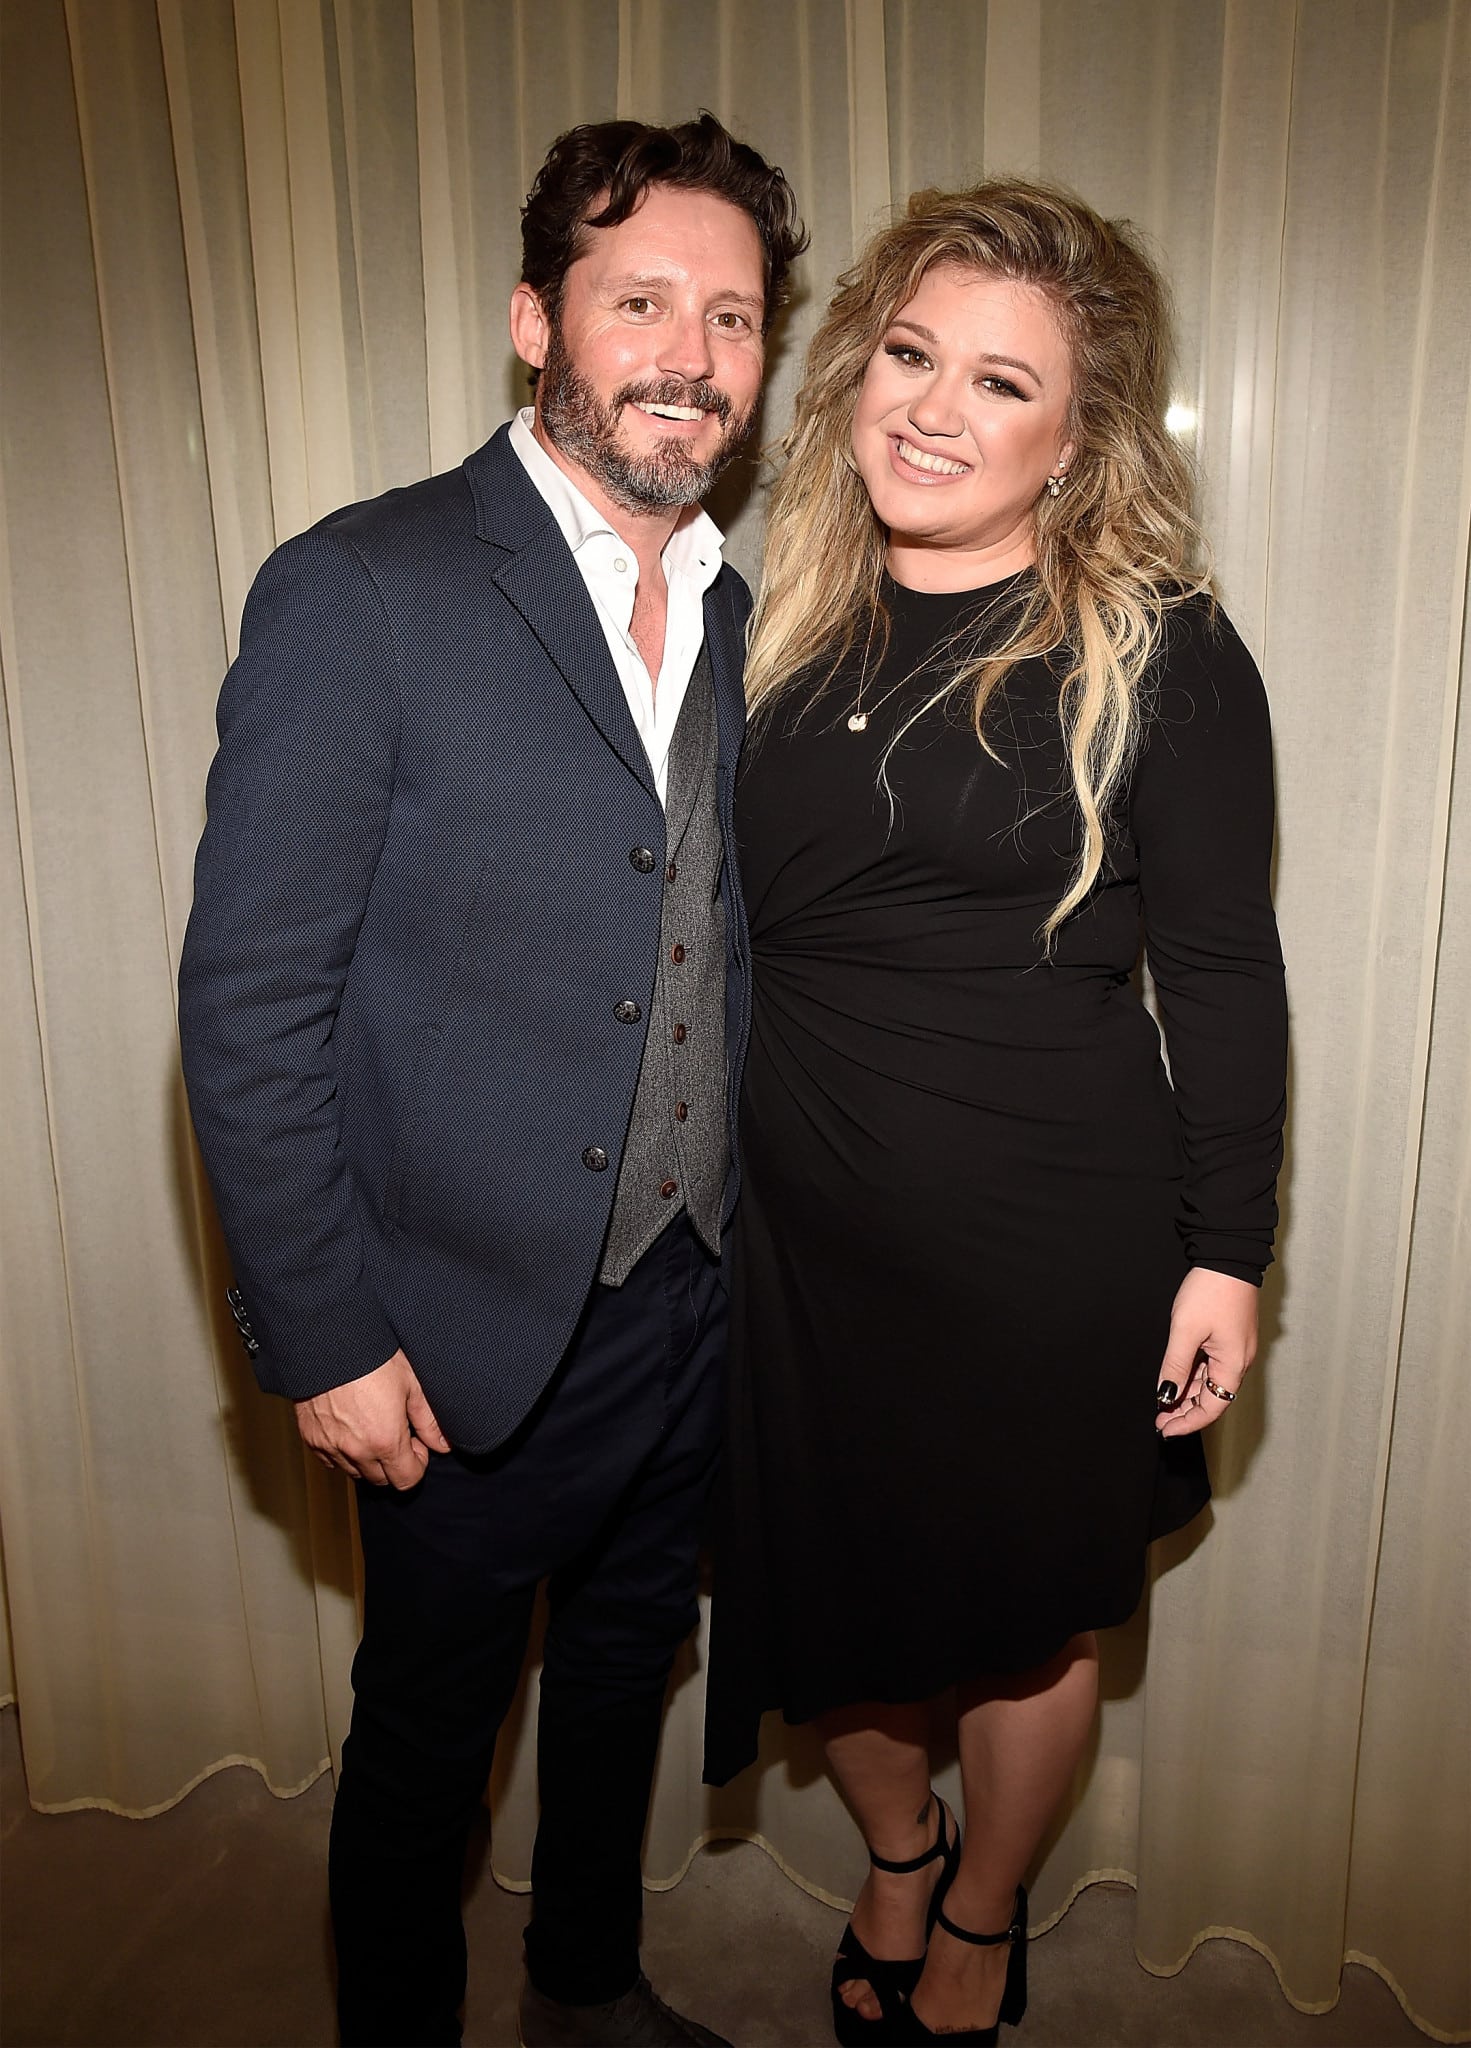 NEW YORK, NY - SEPTEMBER 06: (Exclusive Coverage) Brandon Blackstock and Kelly Clarkson backstage after she performed songs from her new album "The Meaning of Life" at The Rainbow Room on September 6, 2017 in New York City. 